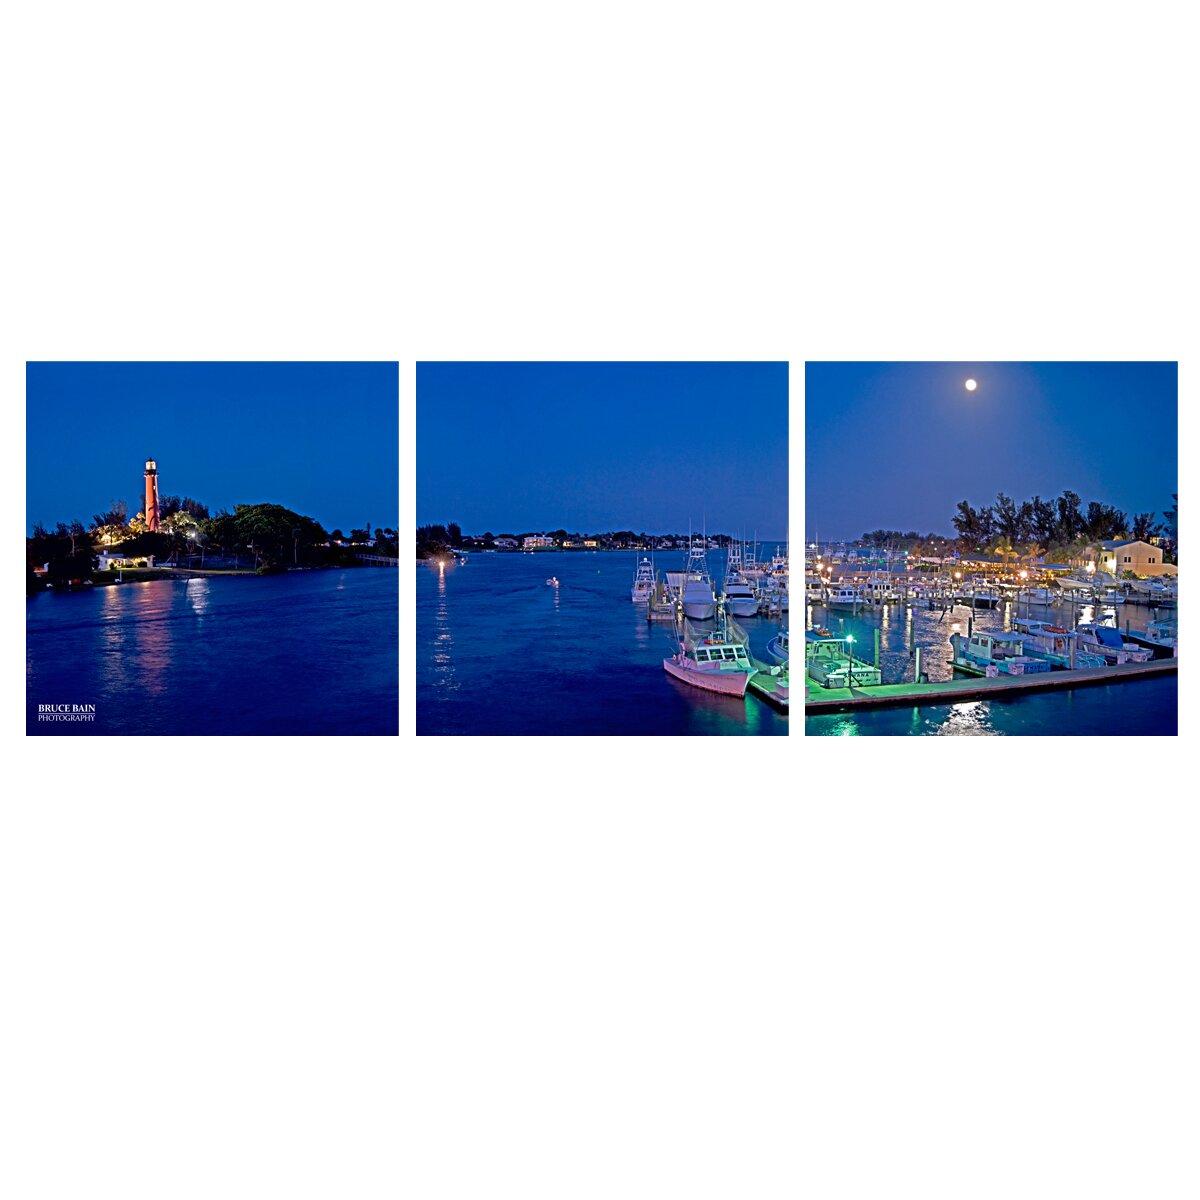 Boats at Night by Bruce Bain 3 Piece Photographic Print on Wrapped